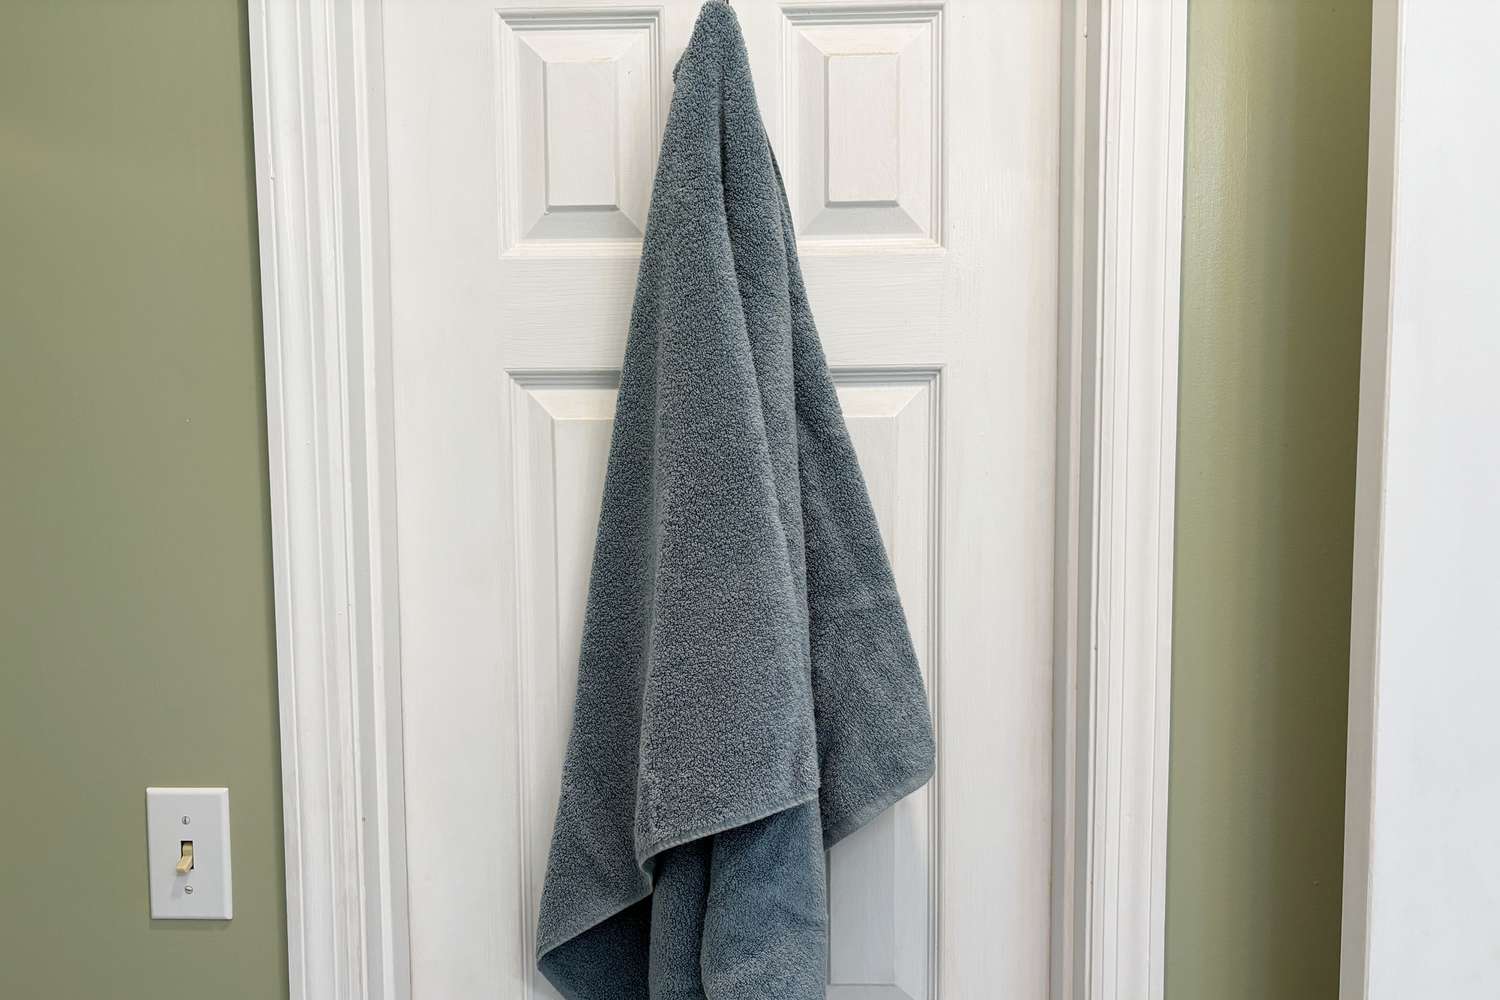 A Bamboo Bliss Resort Bamboo Collection by RHH Bath Towels hangs on a door hook